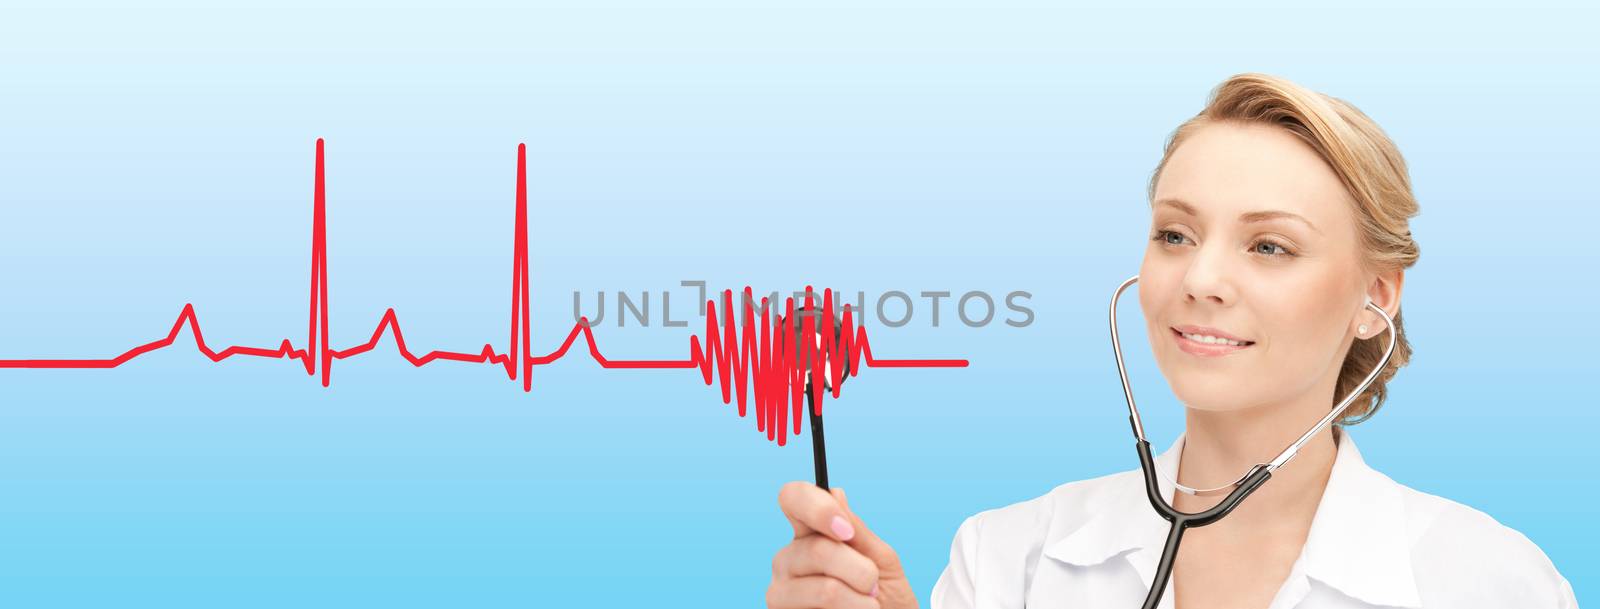 healthcare, people, medicine, cardiology and technology concept - smiling young female doctor with stethoscope listening to heartbeat cardiogram over blue background